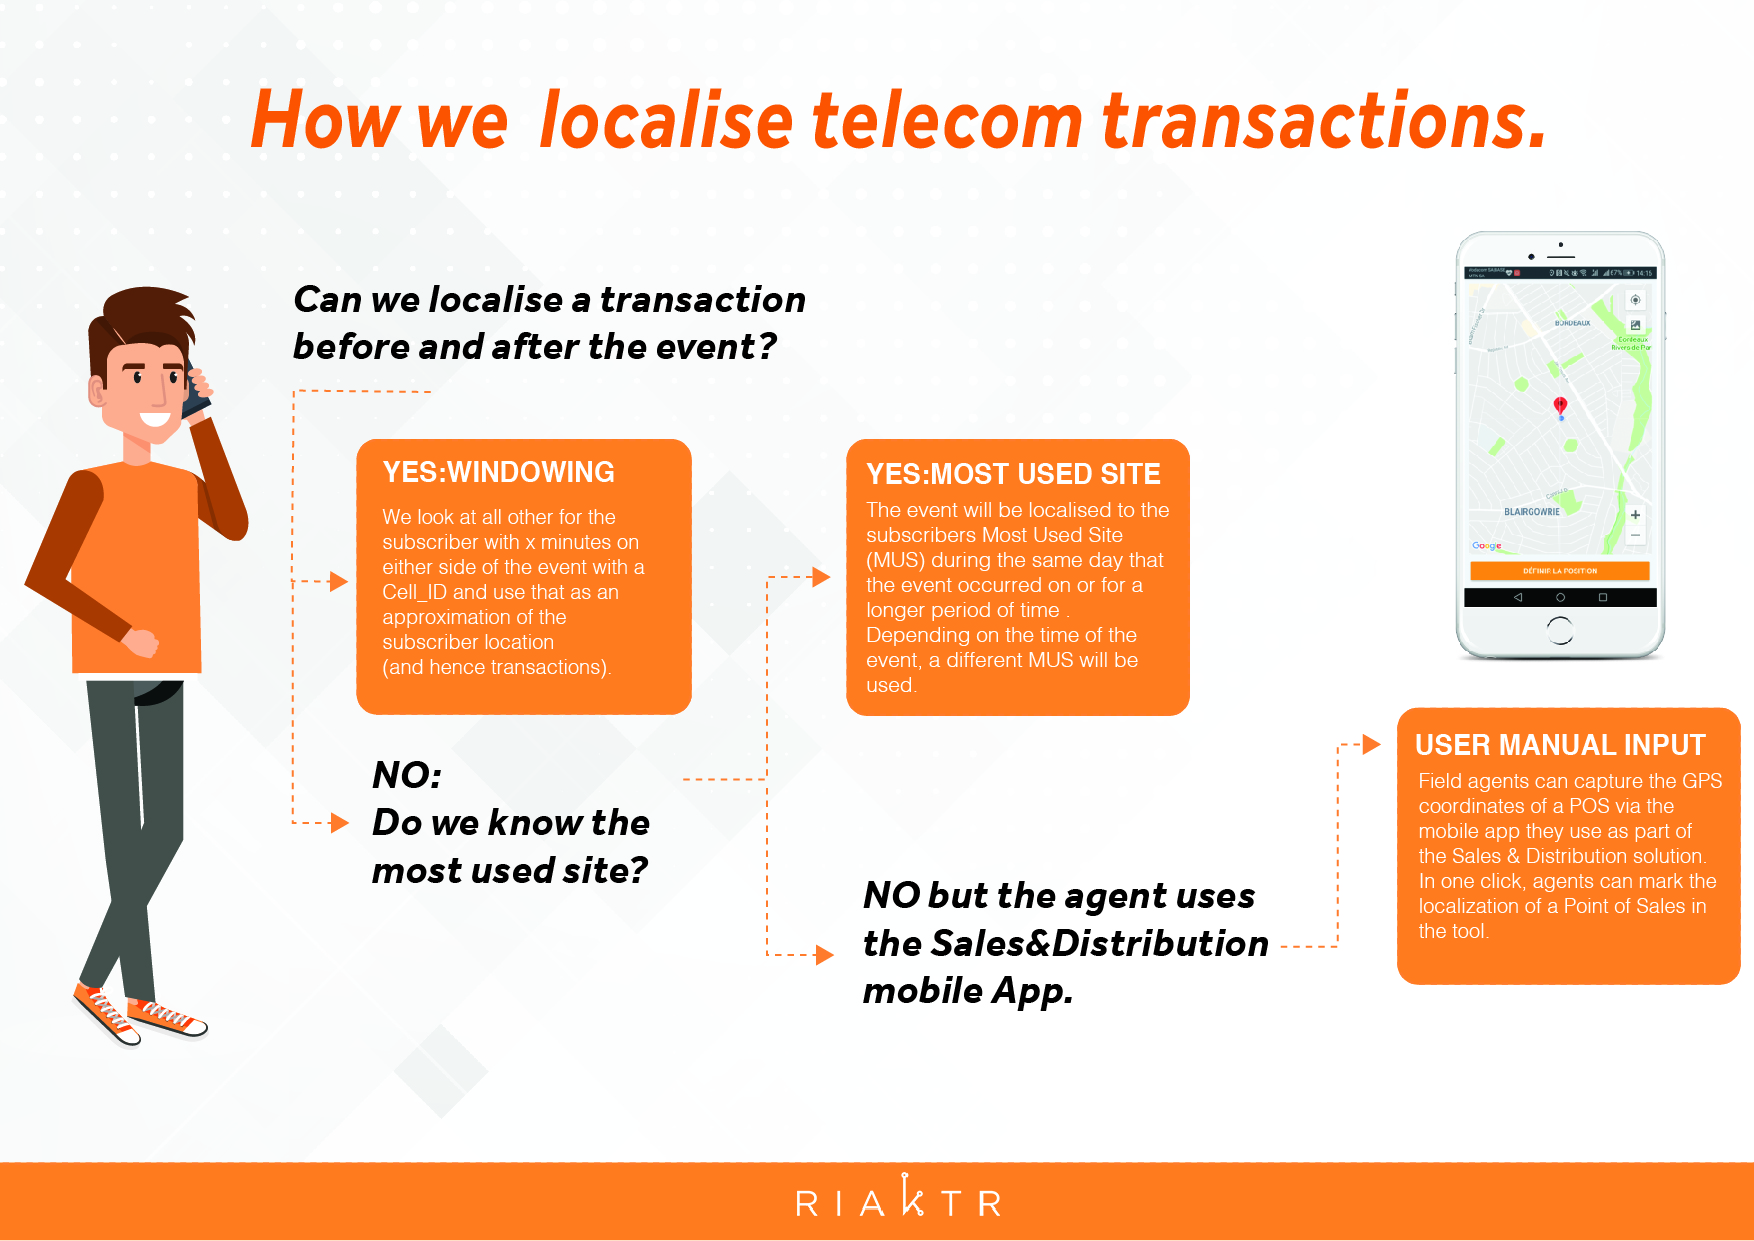 How to localise telecom transactions by Riaktr